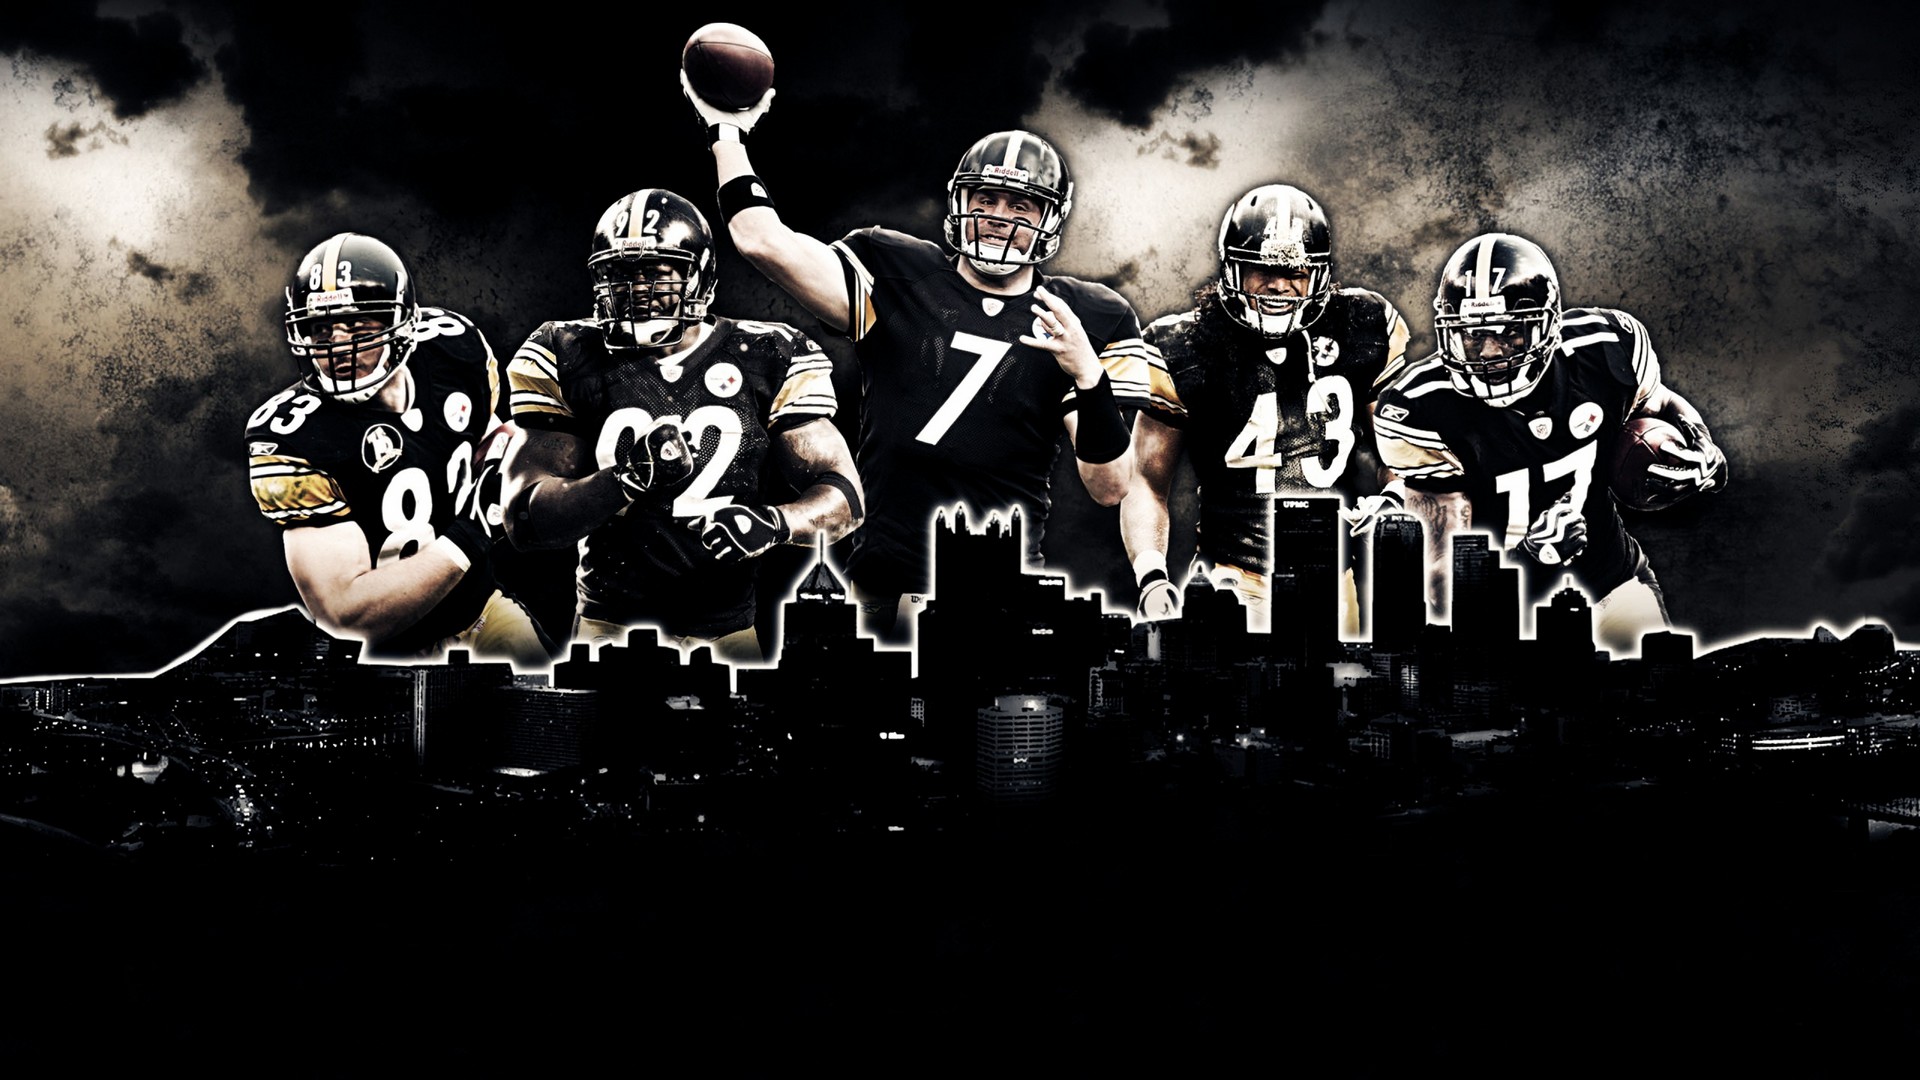 Pittsburgh Steelers Desktop Wallpapers With Resolution 1920X1080 pixel. You can make this wallpaper for your Mac or Windows Desktop Background, iPhone, Android or Tablet and another Smartphone device for free